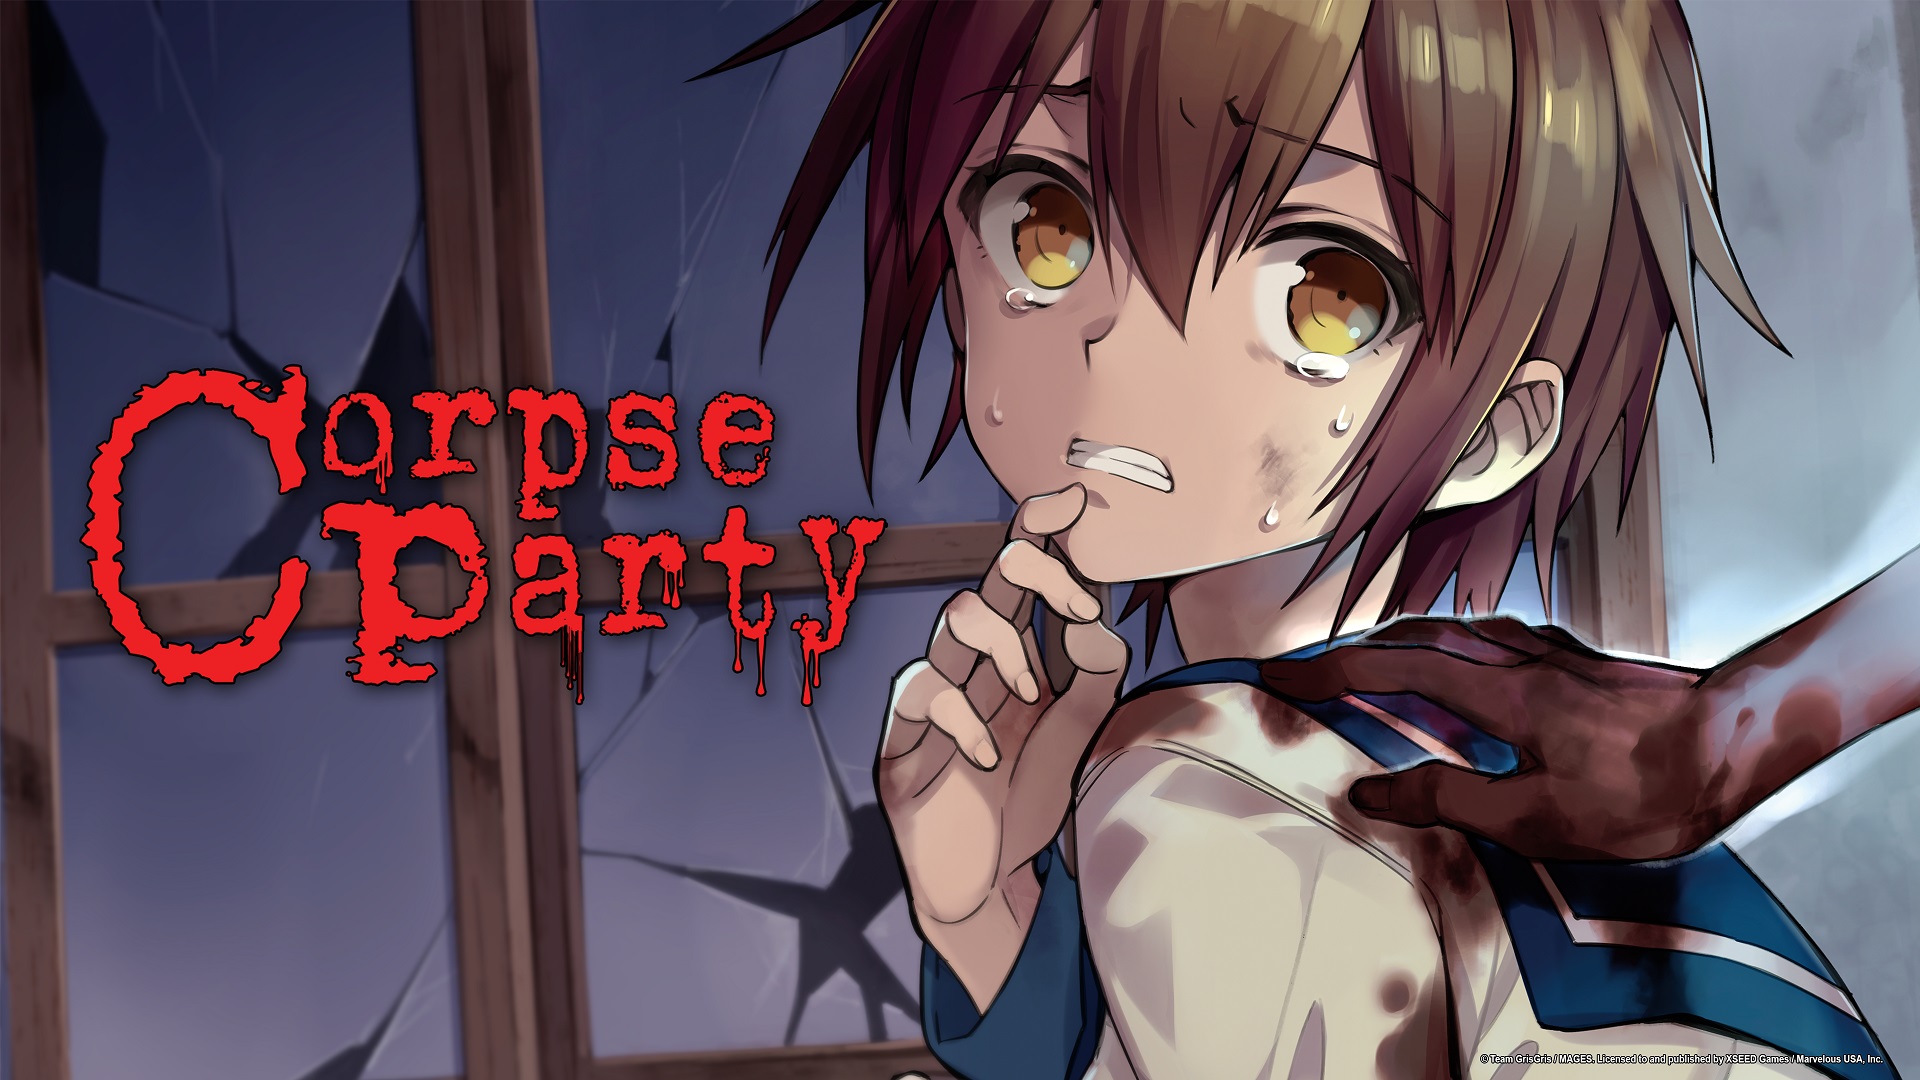 Corpse Party (2021) is Coming West